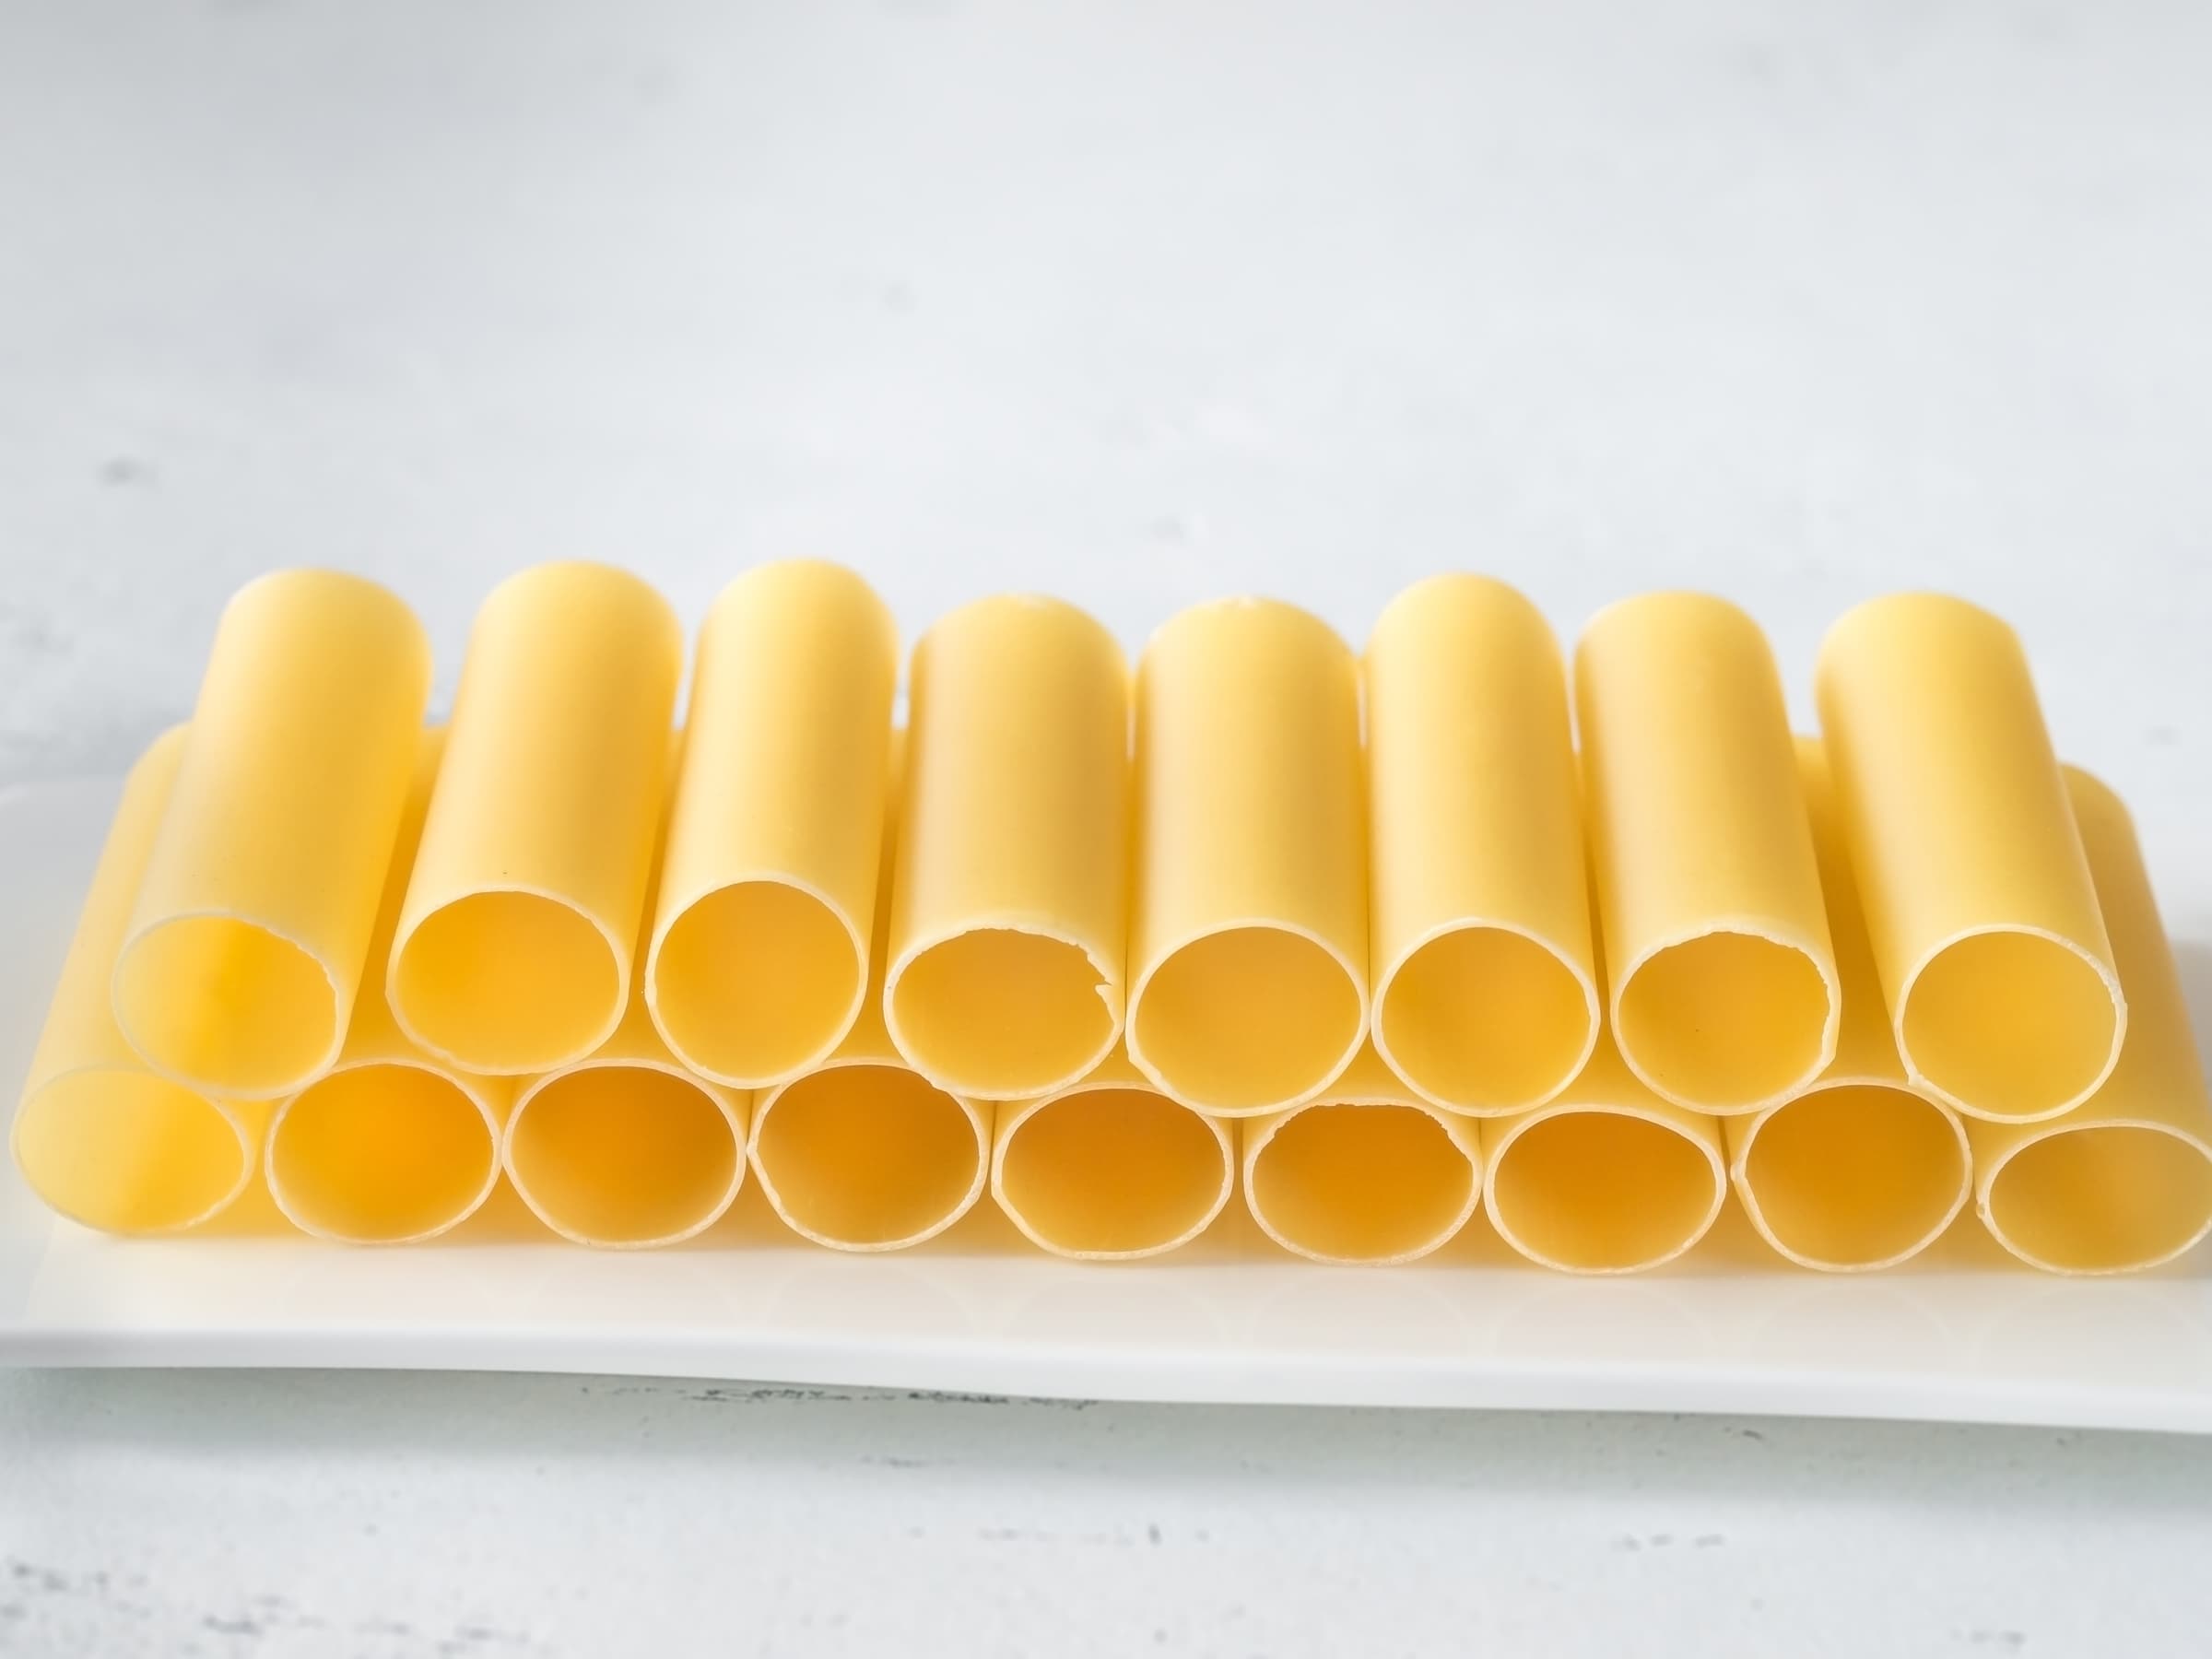 Image of 17 uncooked cannelloni tubes on a white plate with a white background.